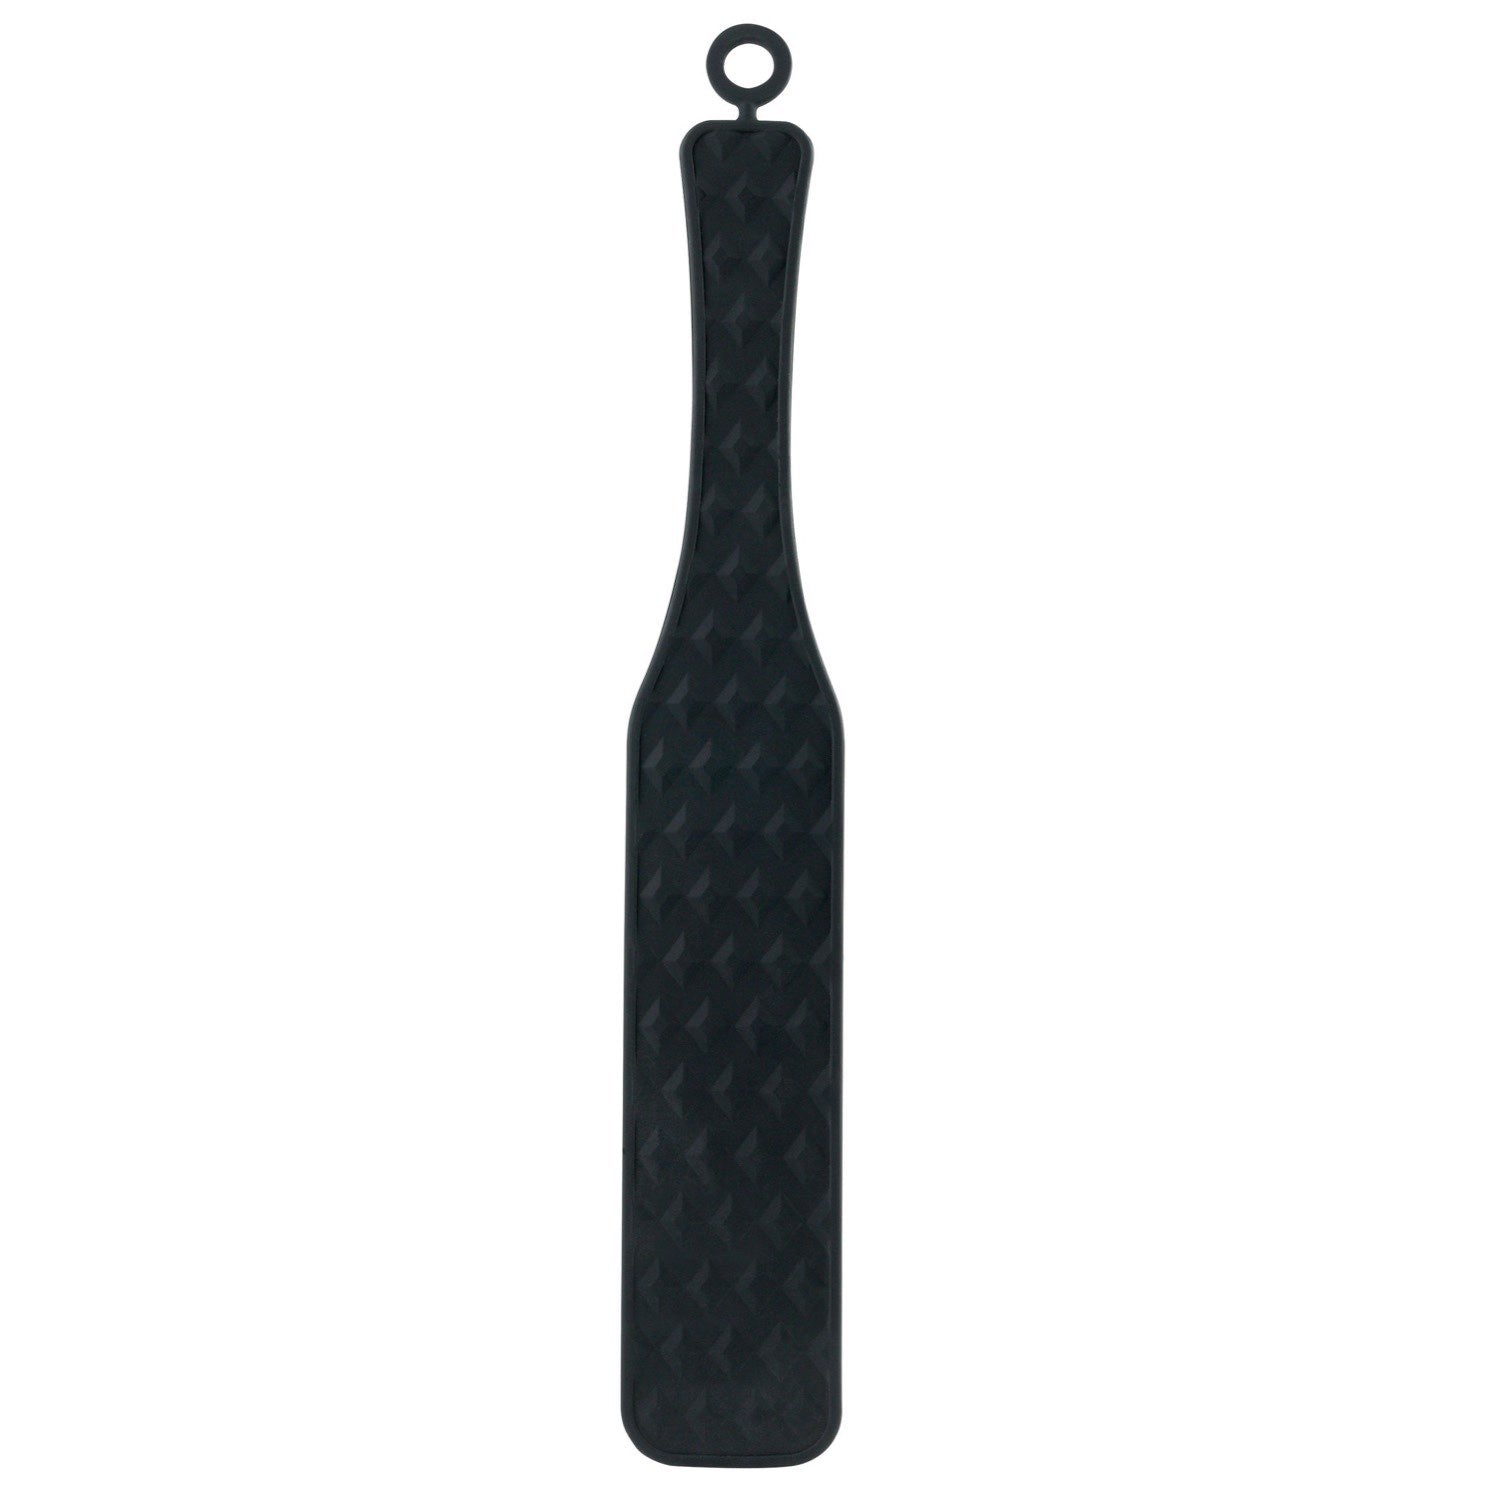 Fetish Fantasy Extreme Silicone Paddle - Black Paddle by Pipedream